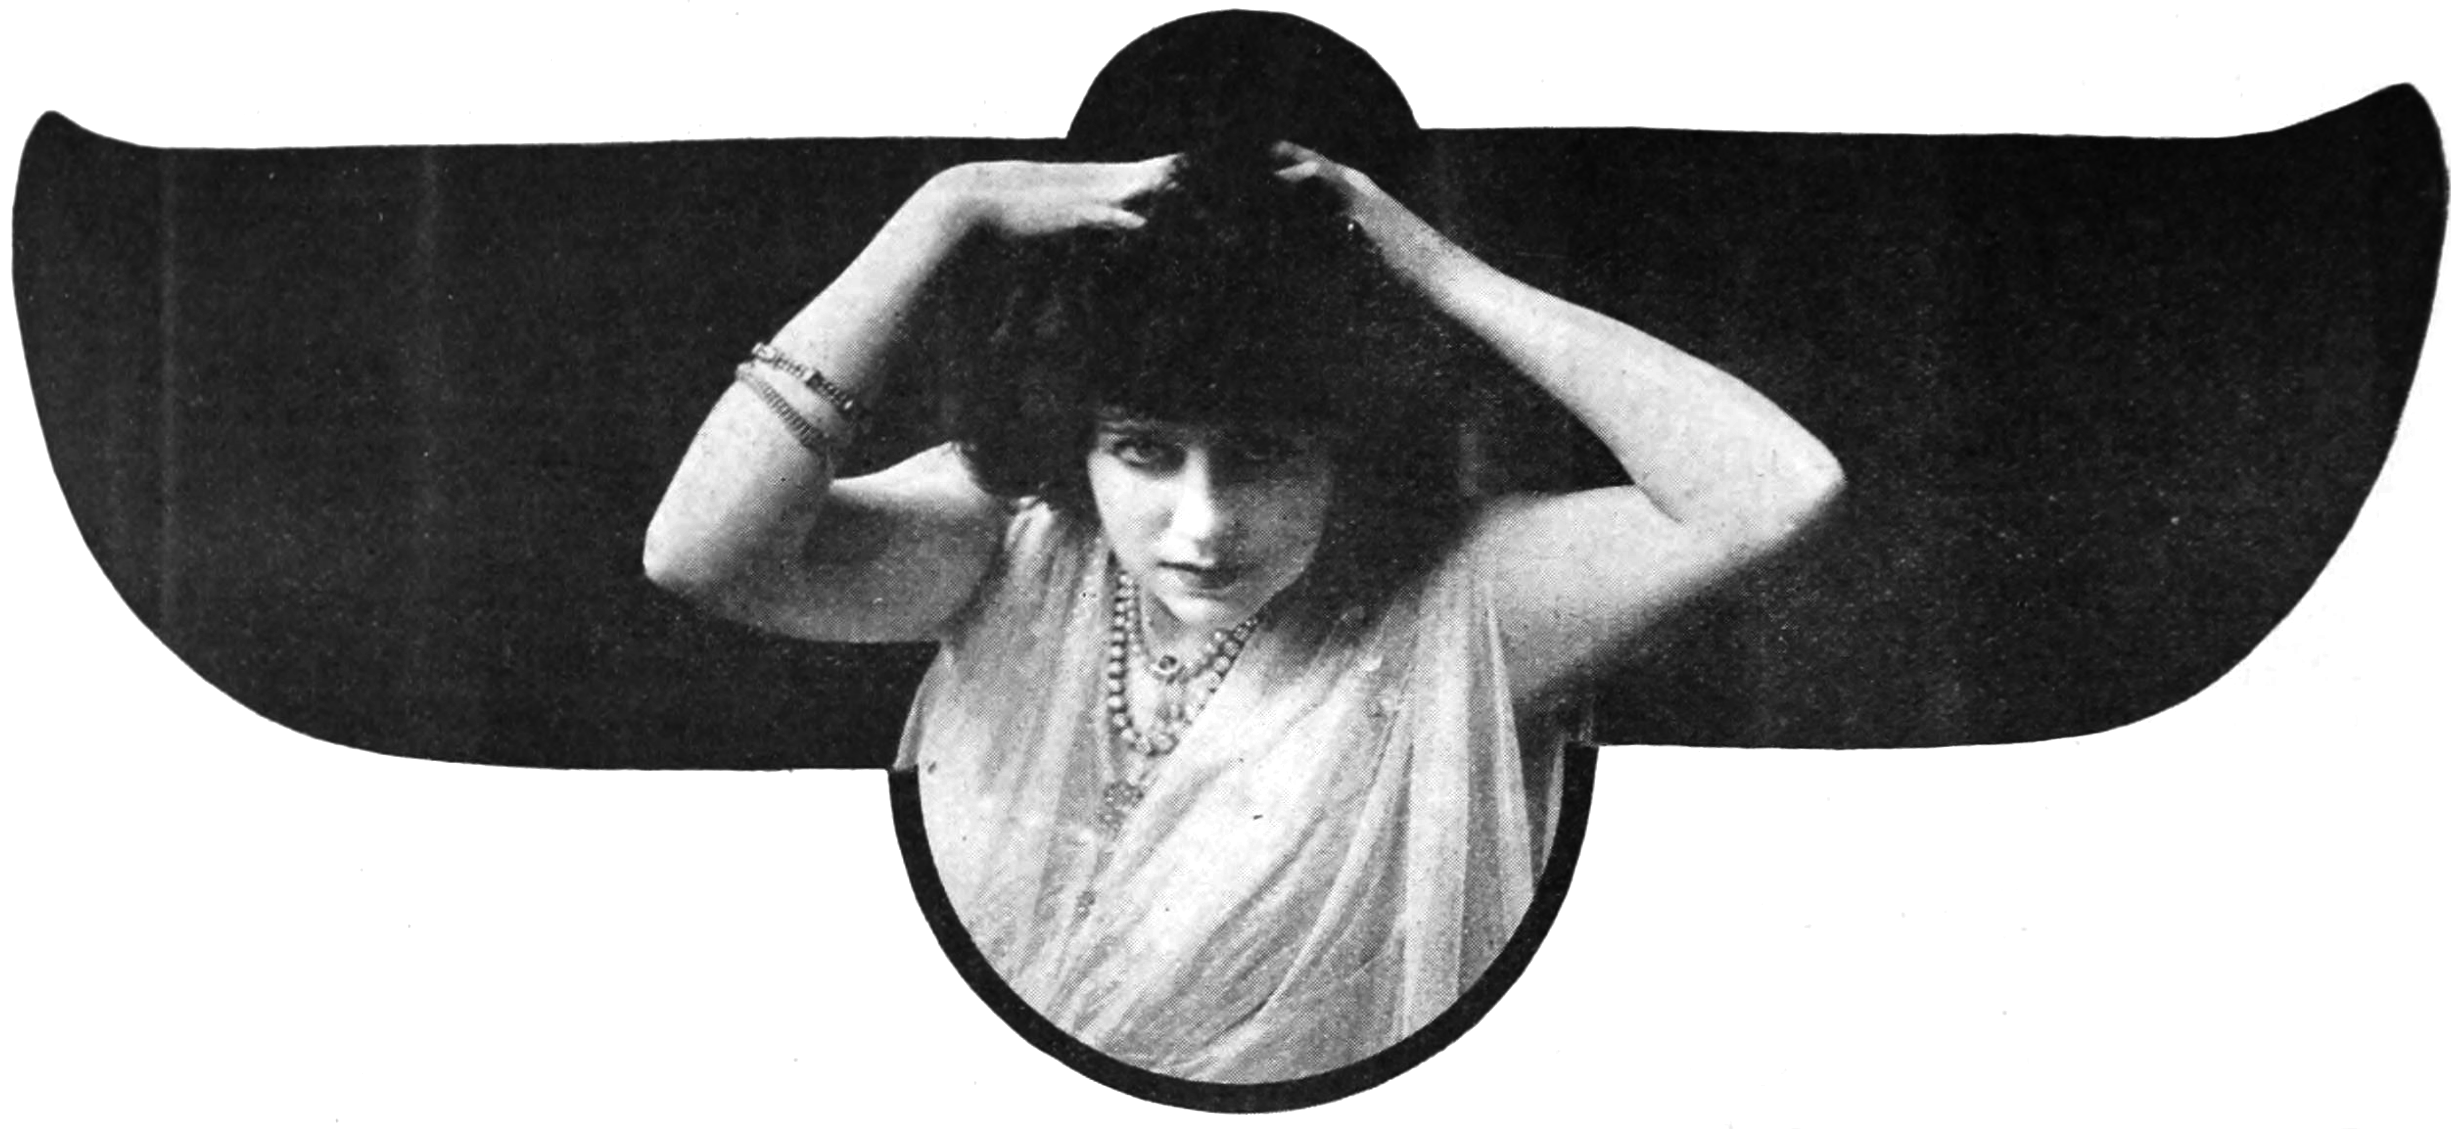 File:Helen Gardner in ad for Cleopatra, 1912.png - Wikimedia Commons